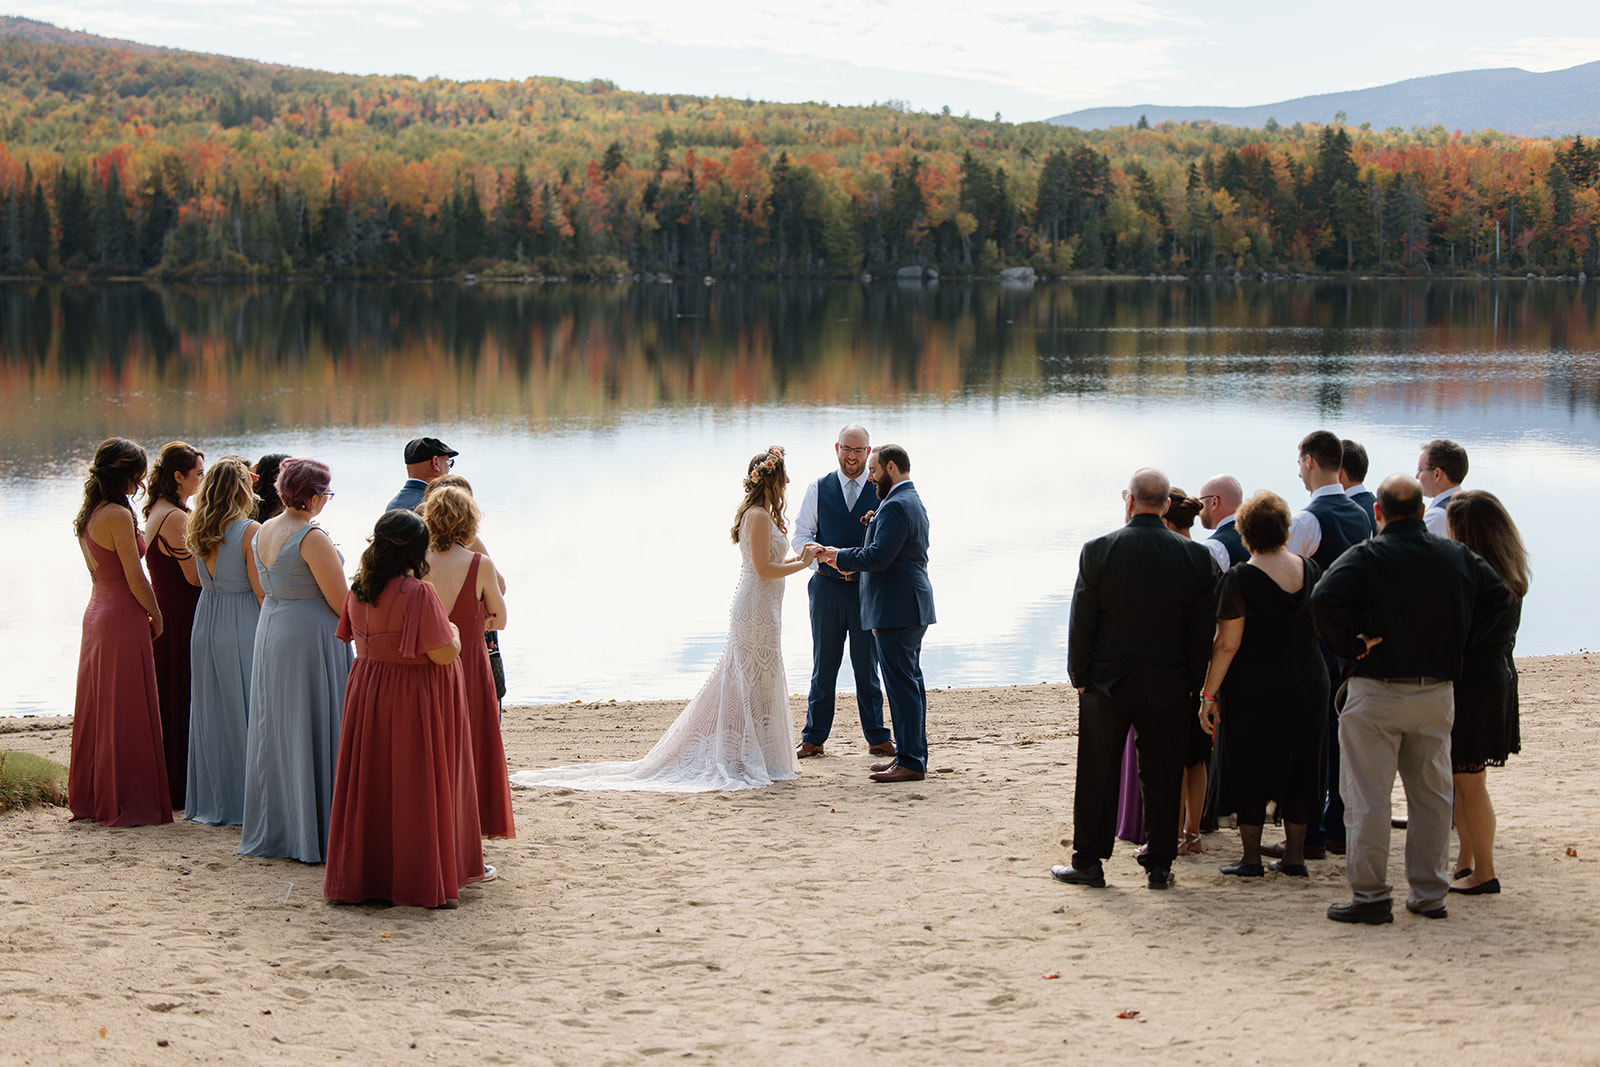 New Hampshire State Park wedding ceremony with guests